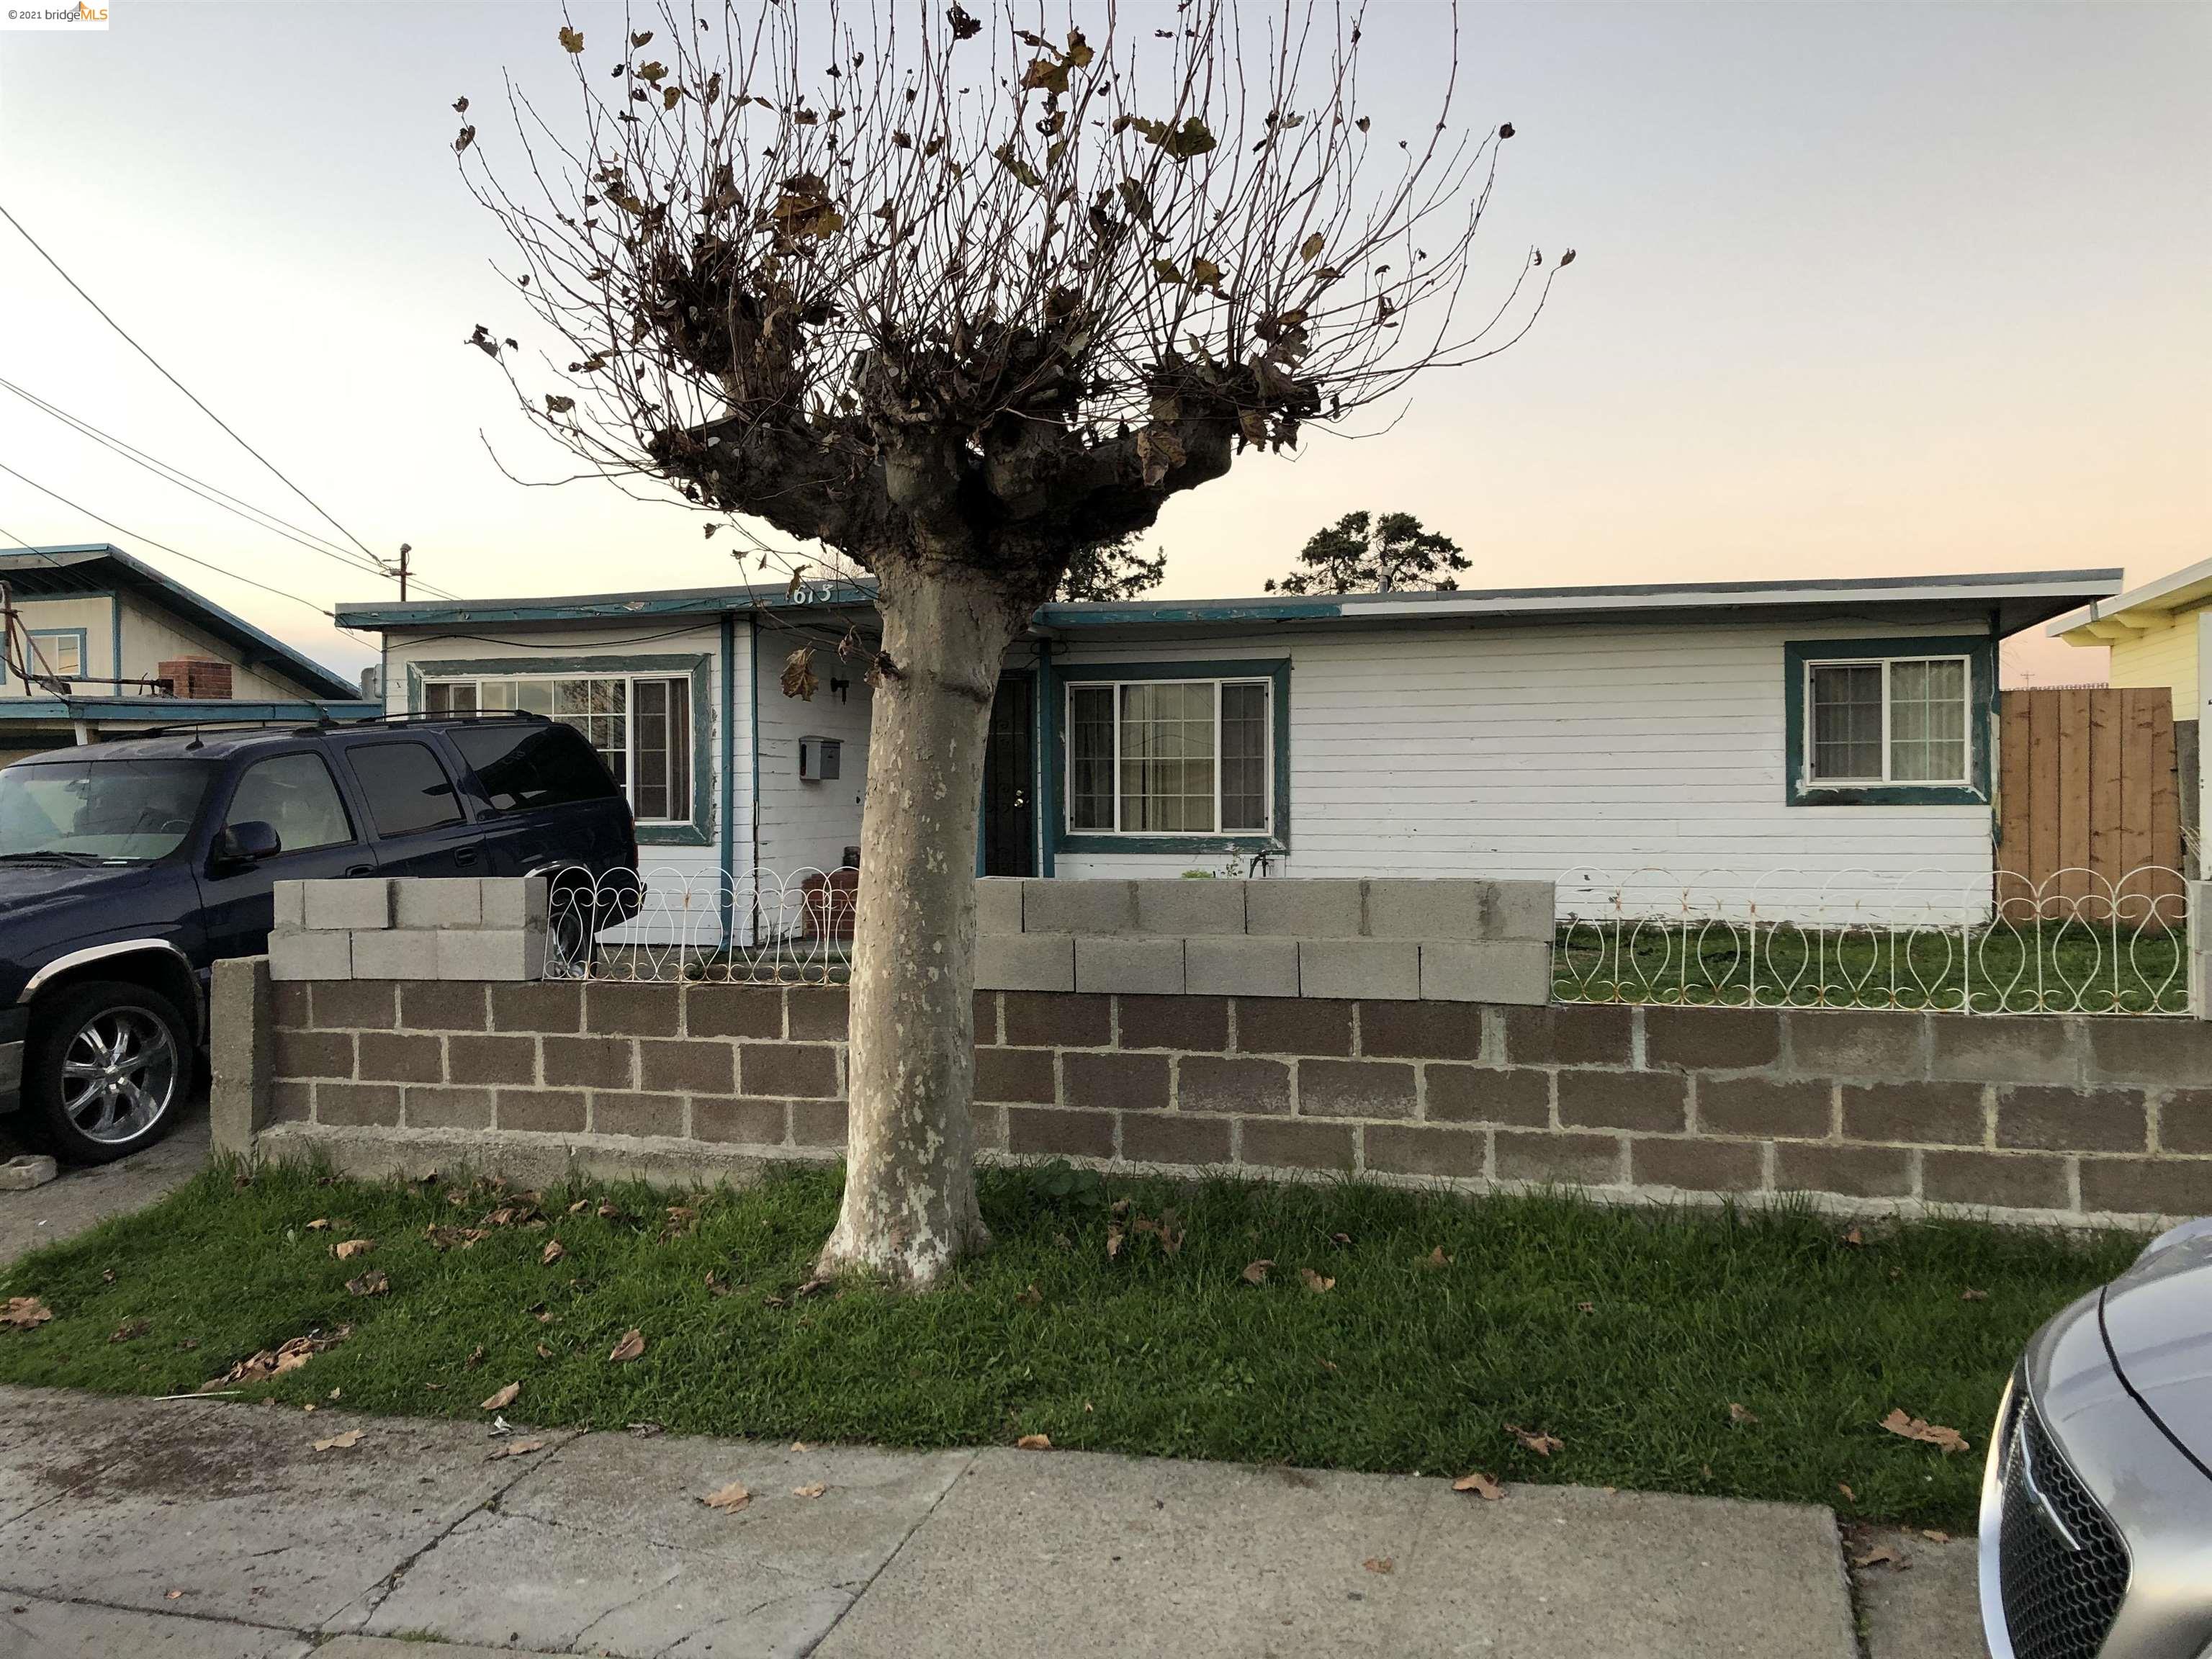 Photo of 613 Banks Dr in Richmond, CA